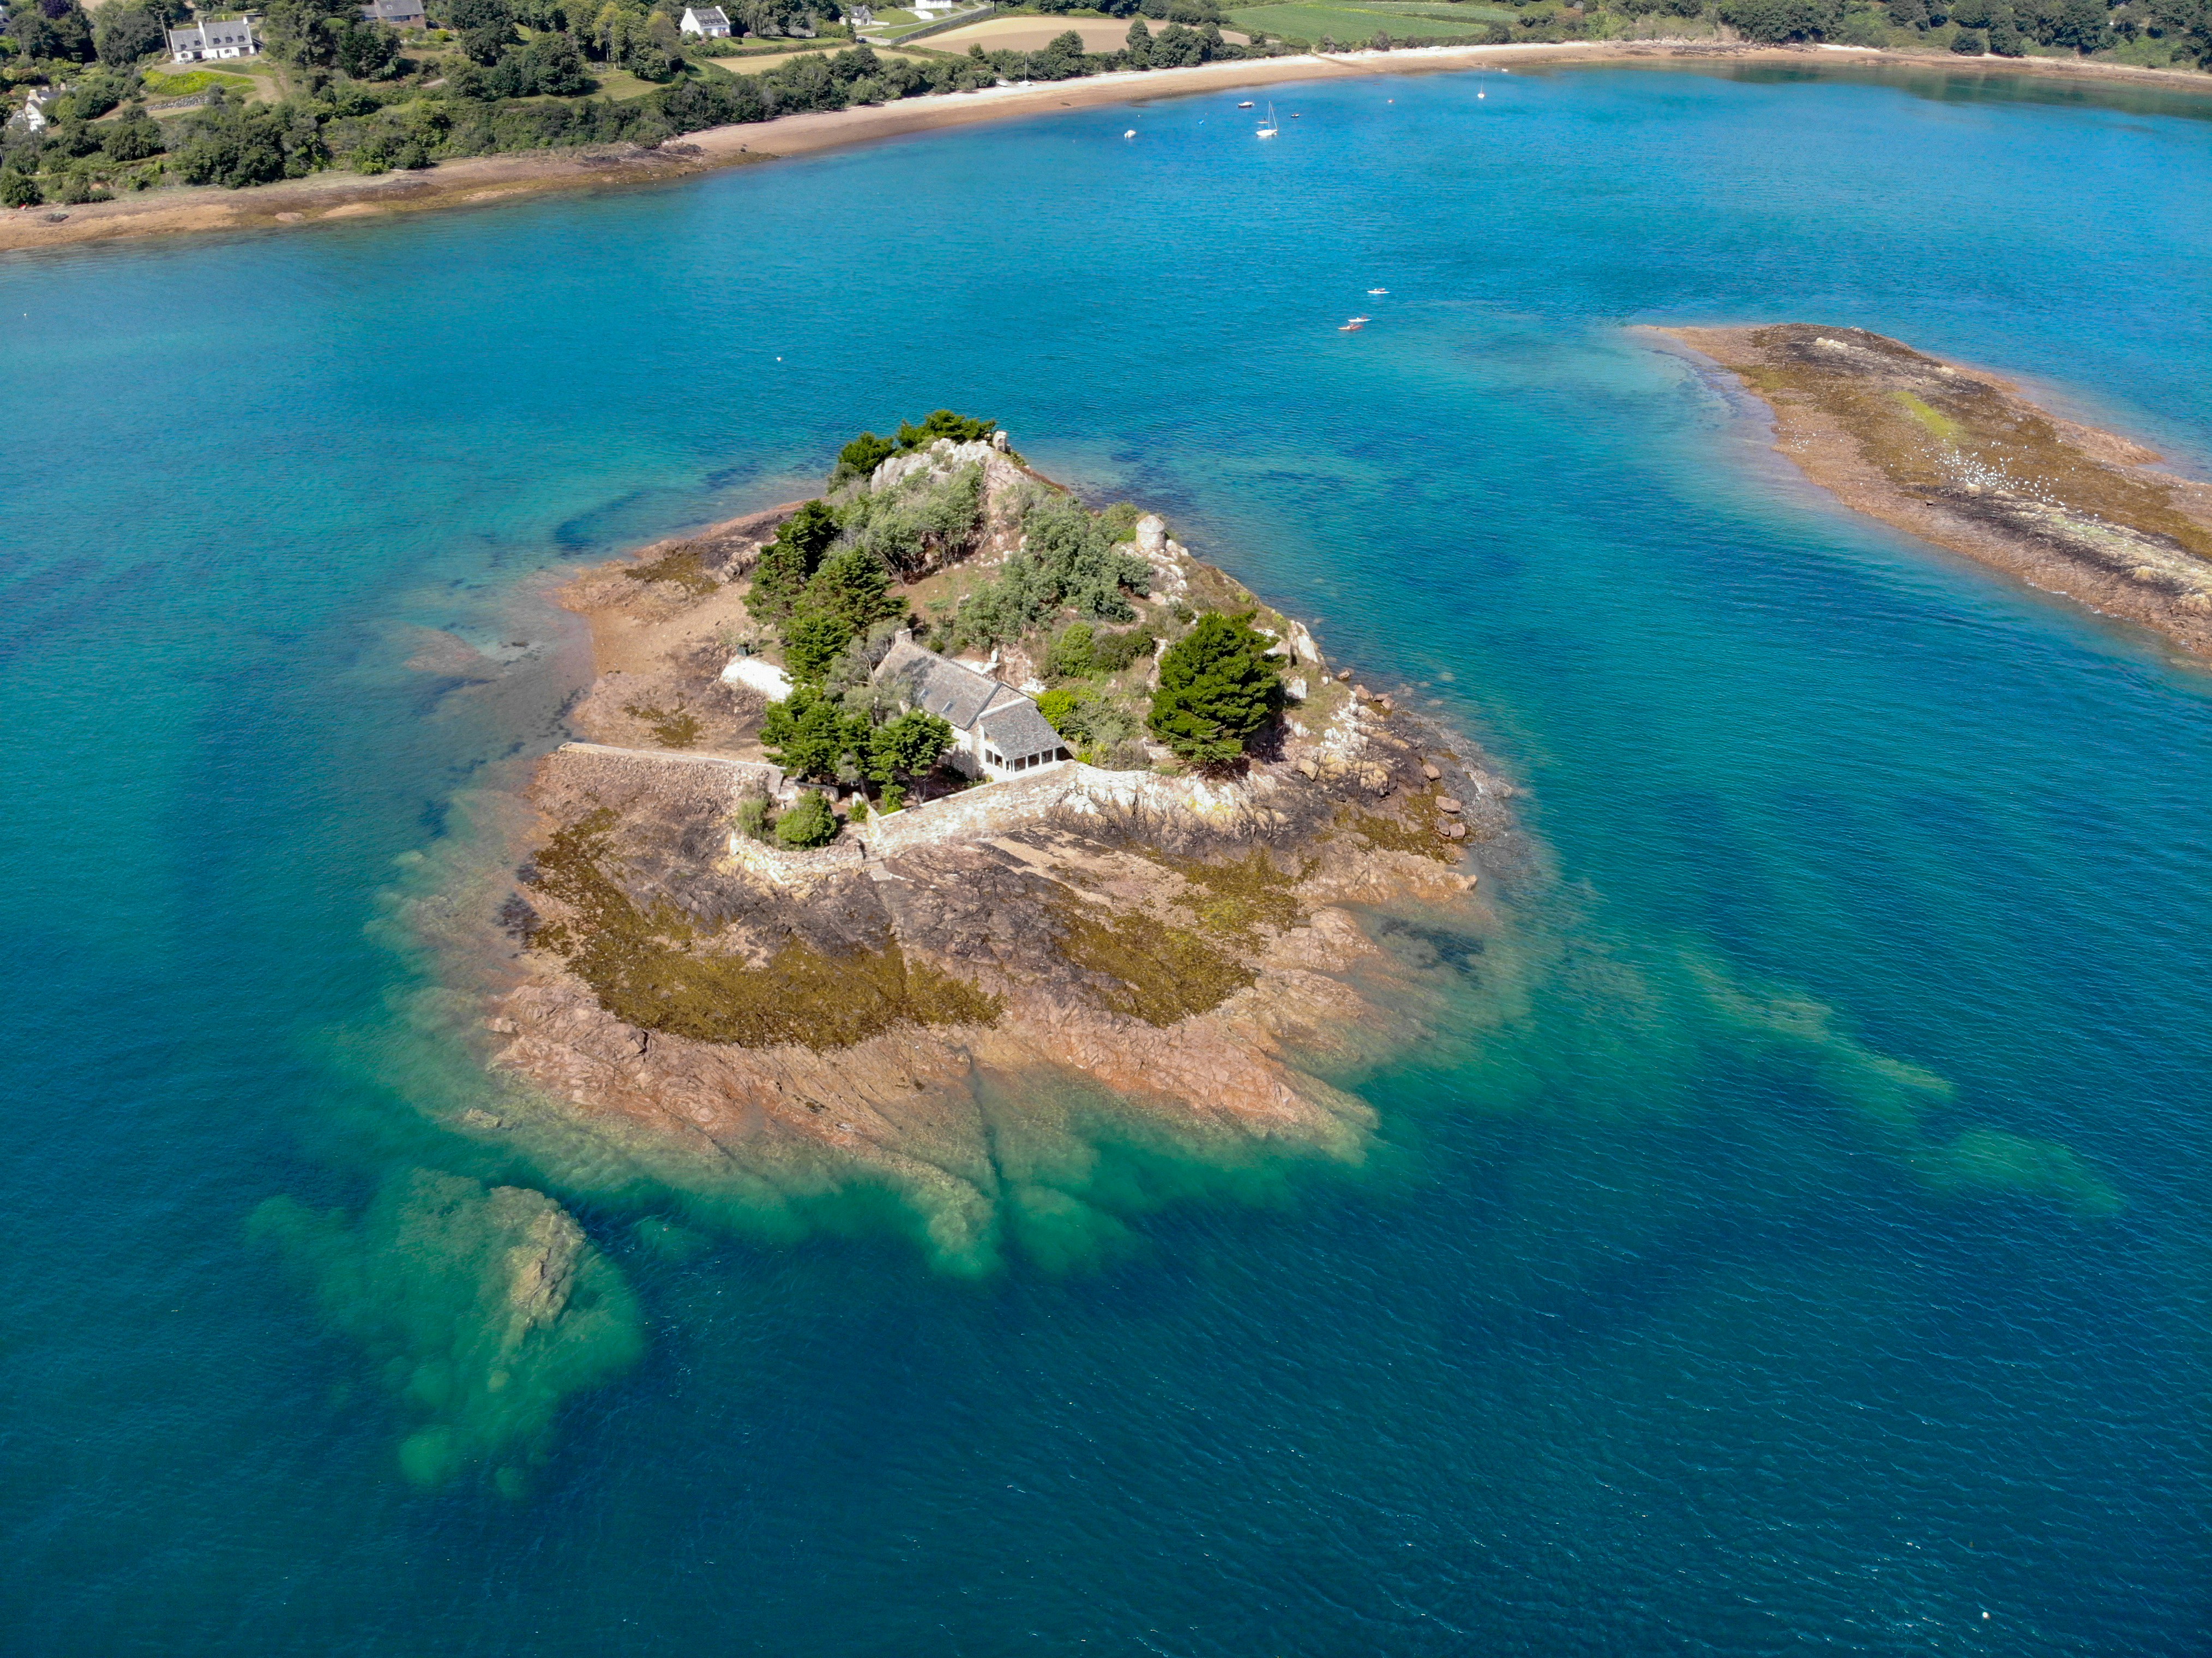 An aerial shot of a private island off the coast of Brittany